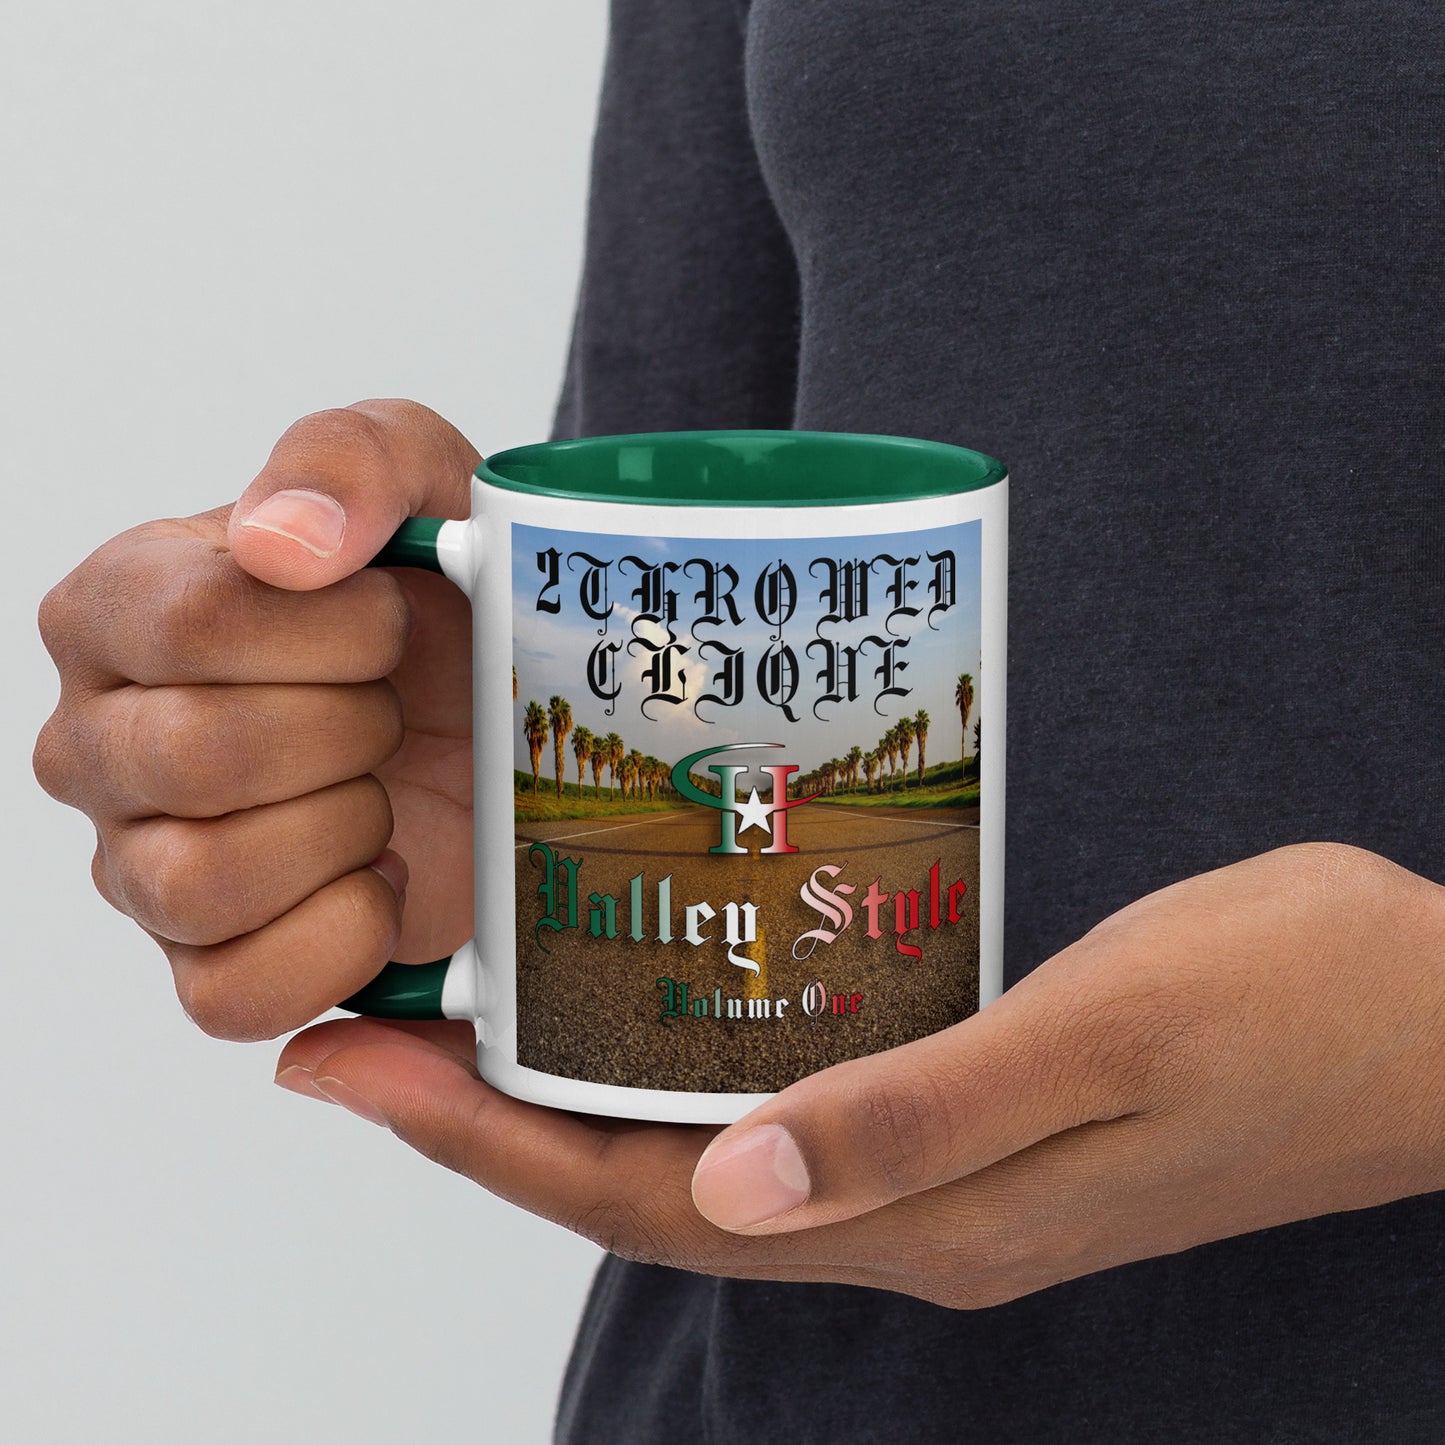 2 Throwed Clique - Valley Style Vol. 1 Mug With Color Inside